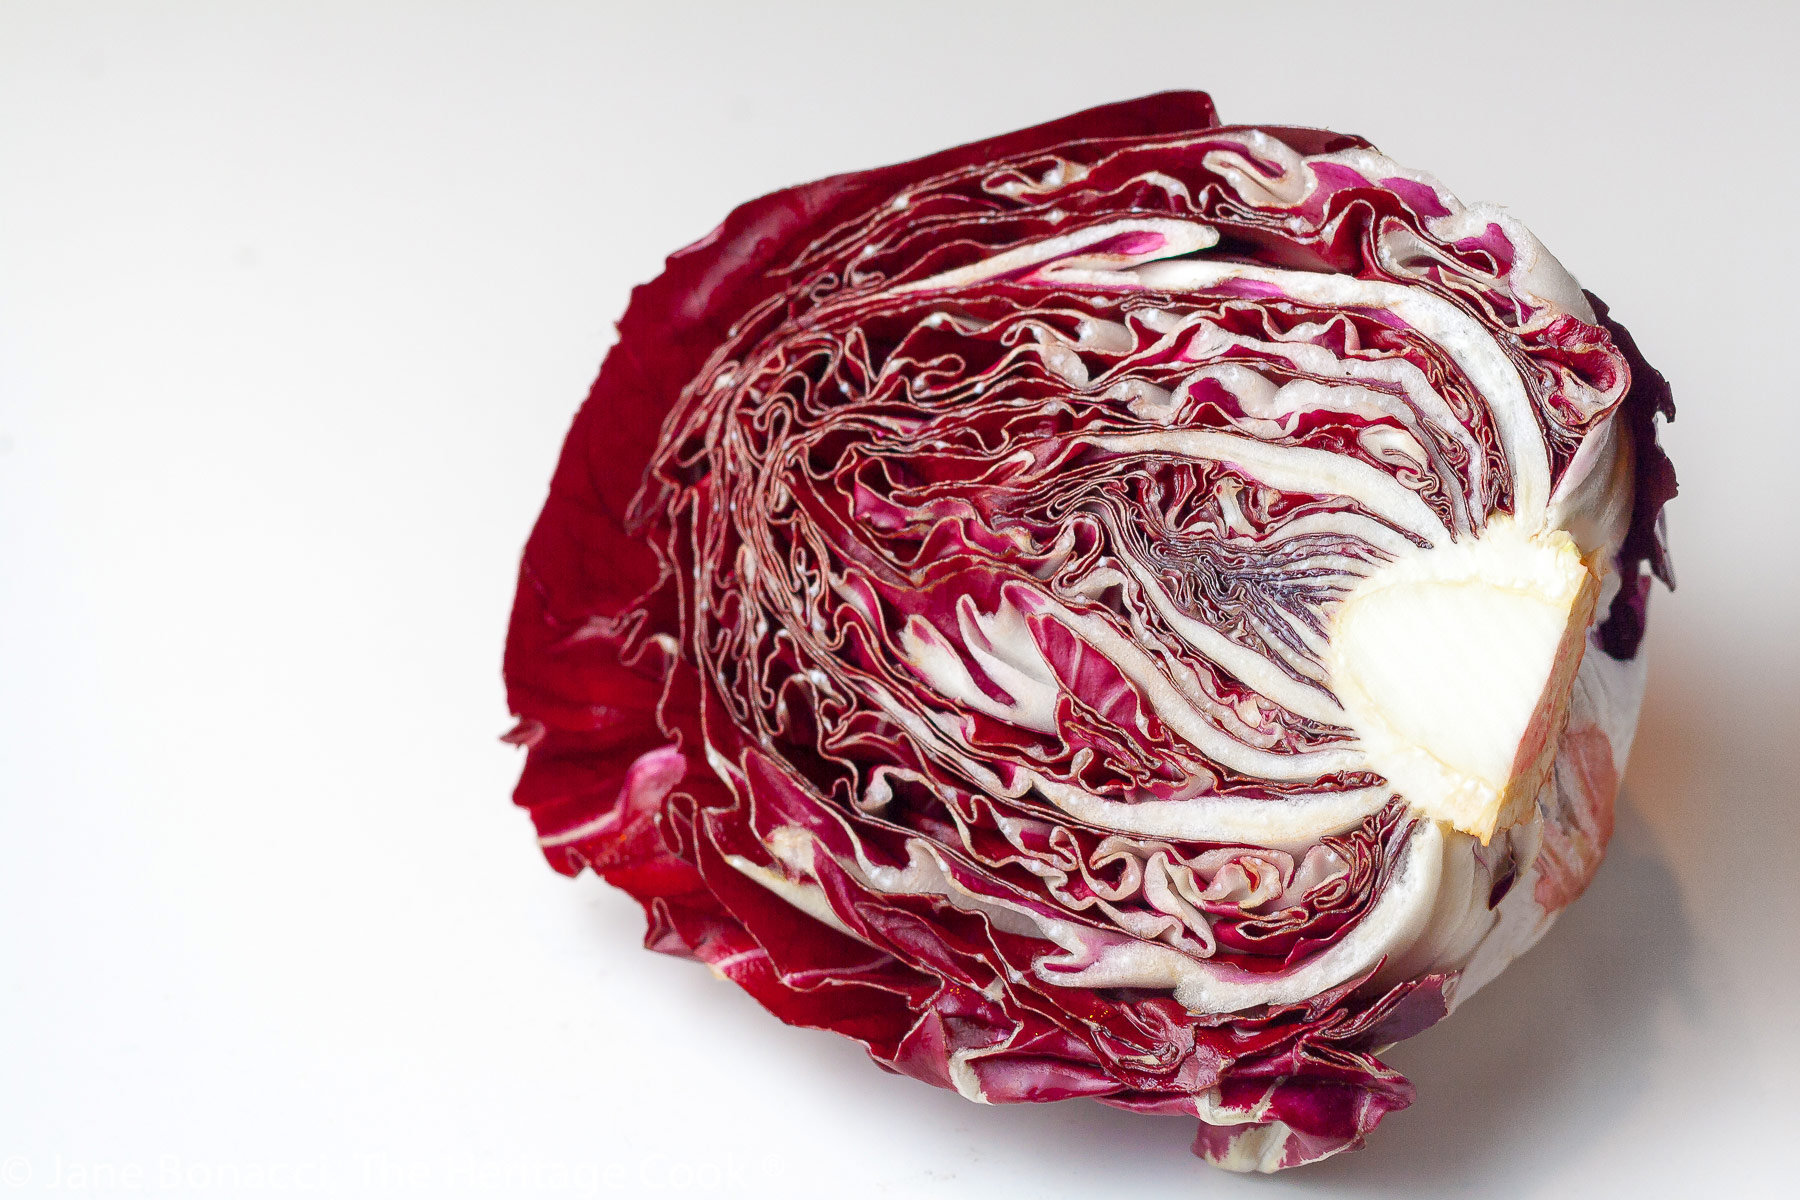 red cabbage cut in half showing the internal layers. 